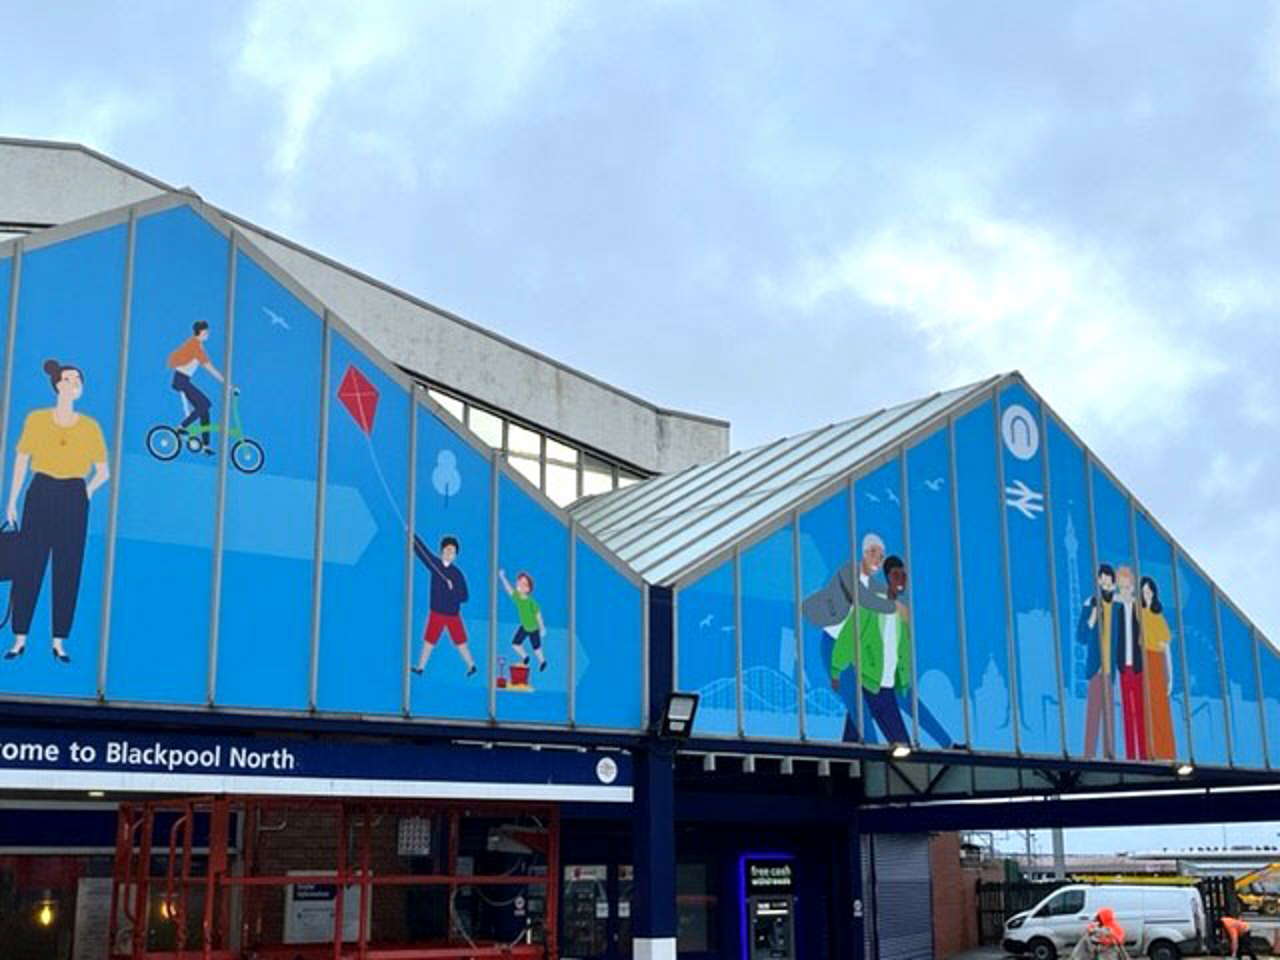 Blackpool North station’s makeover includes a bright and cheerful facade